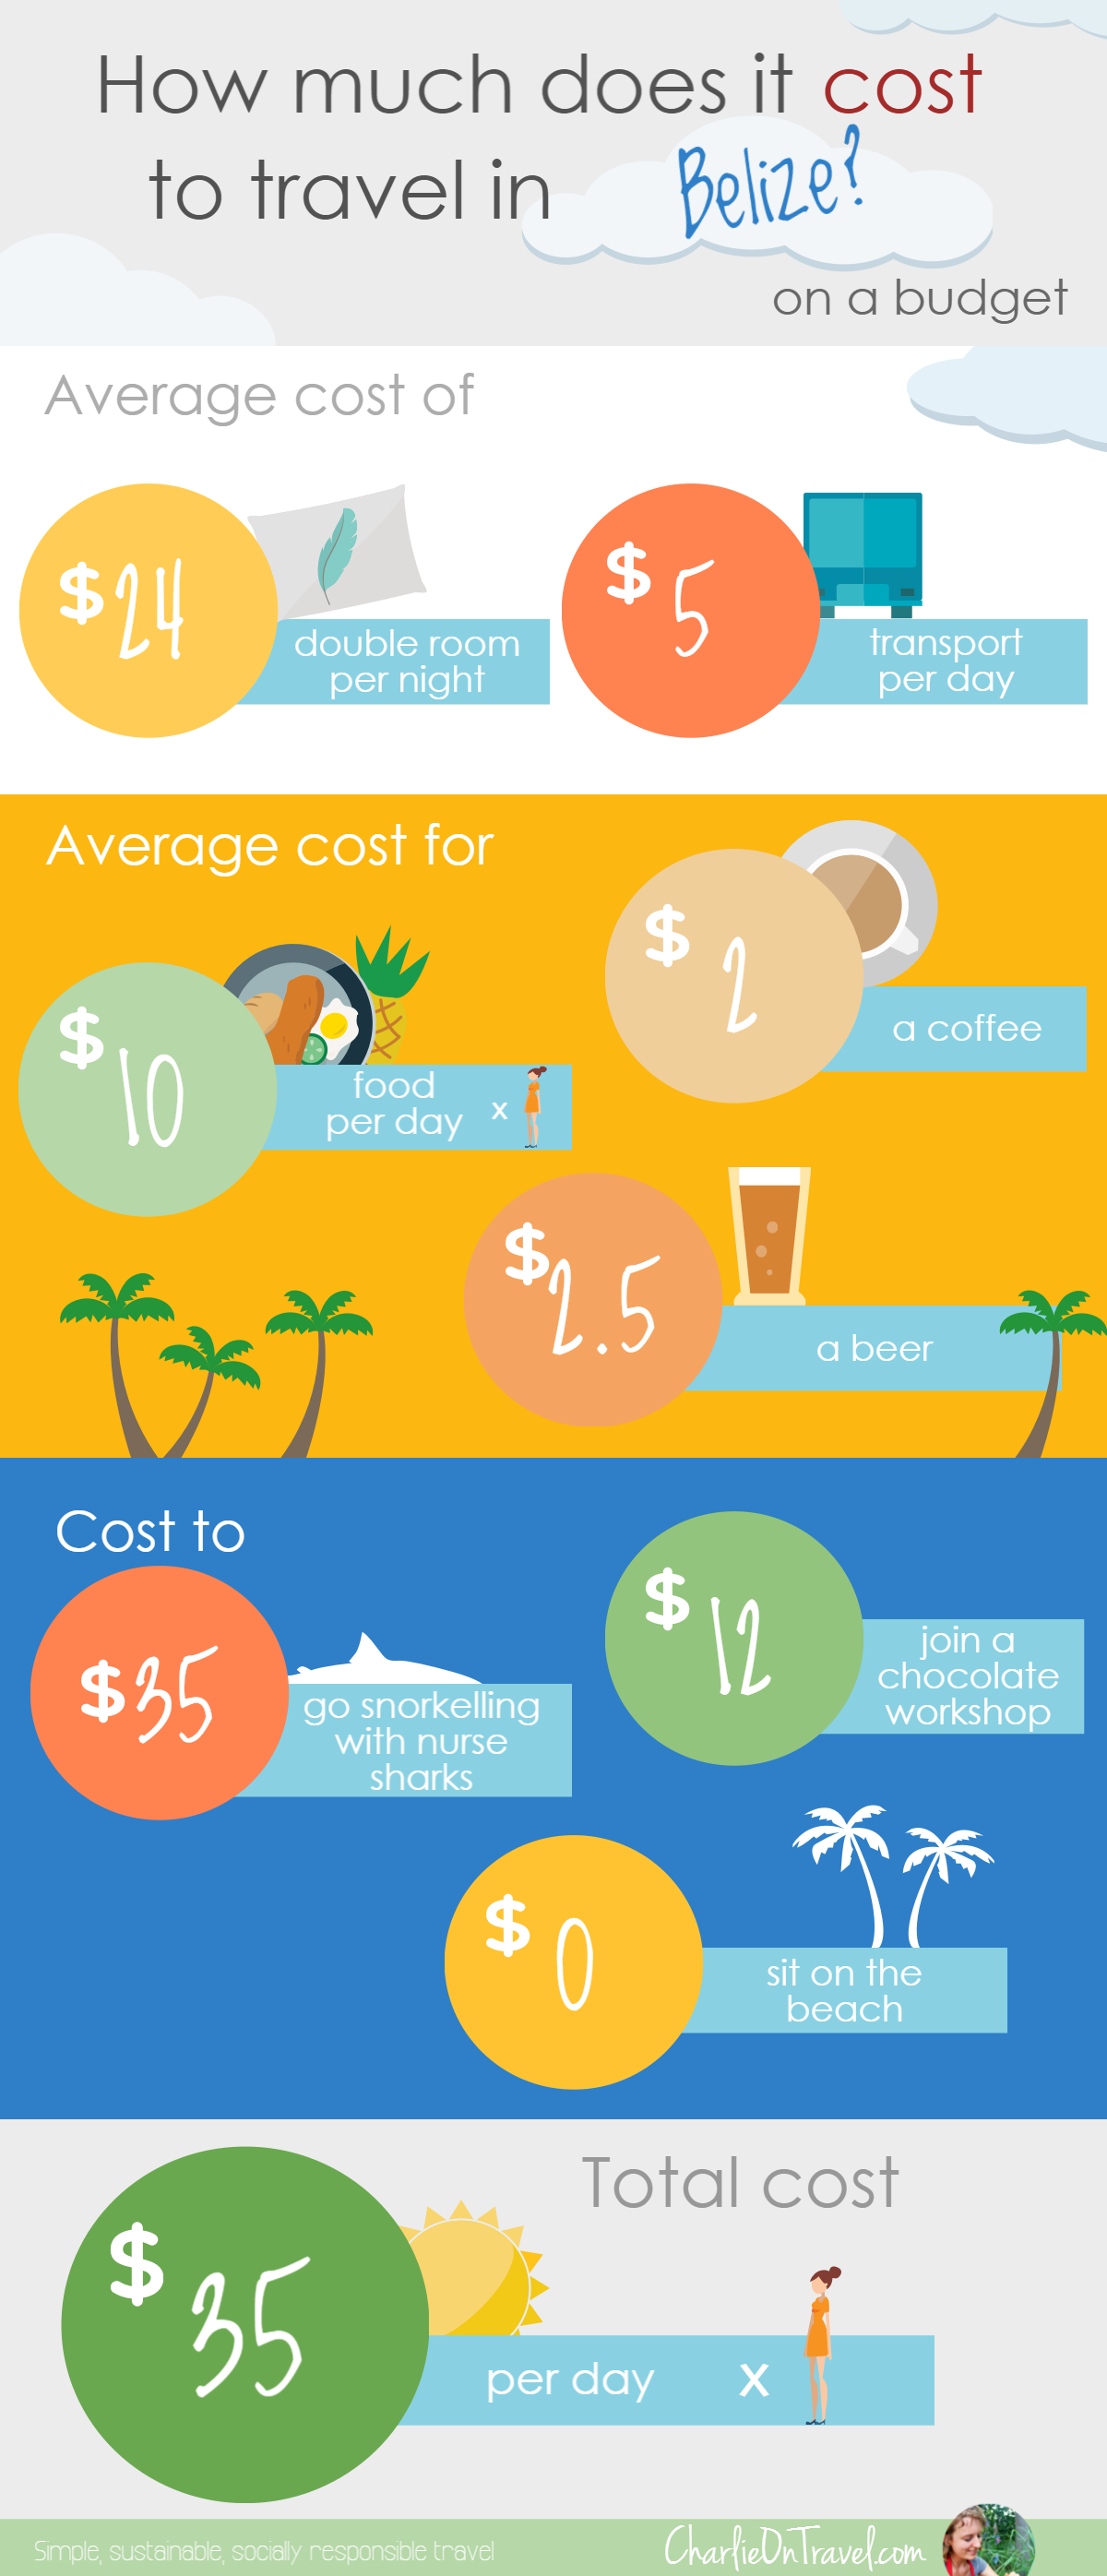 Cost of Budget Travel in Belize Infographic by Charlie on Travel